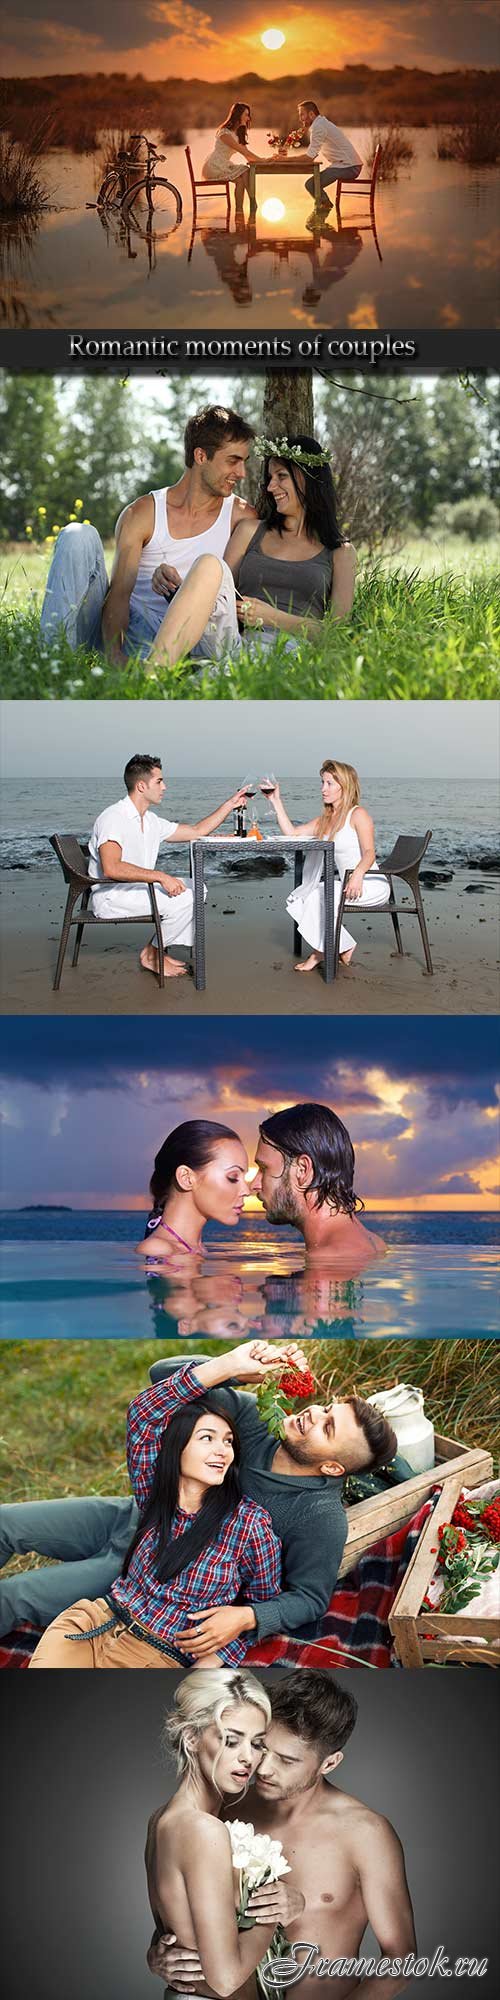 Romantic moments of couples